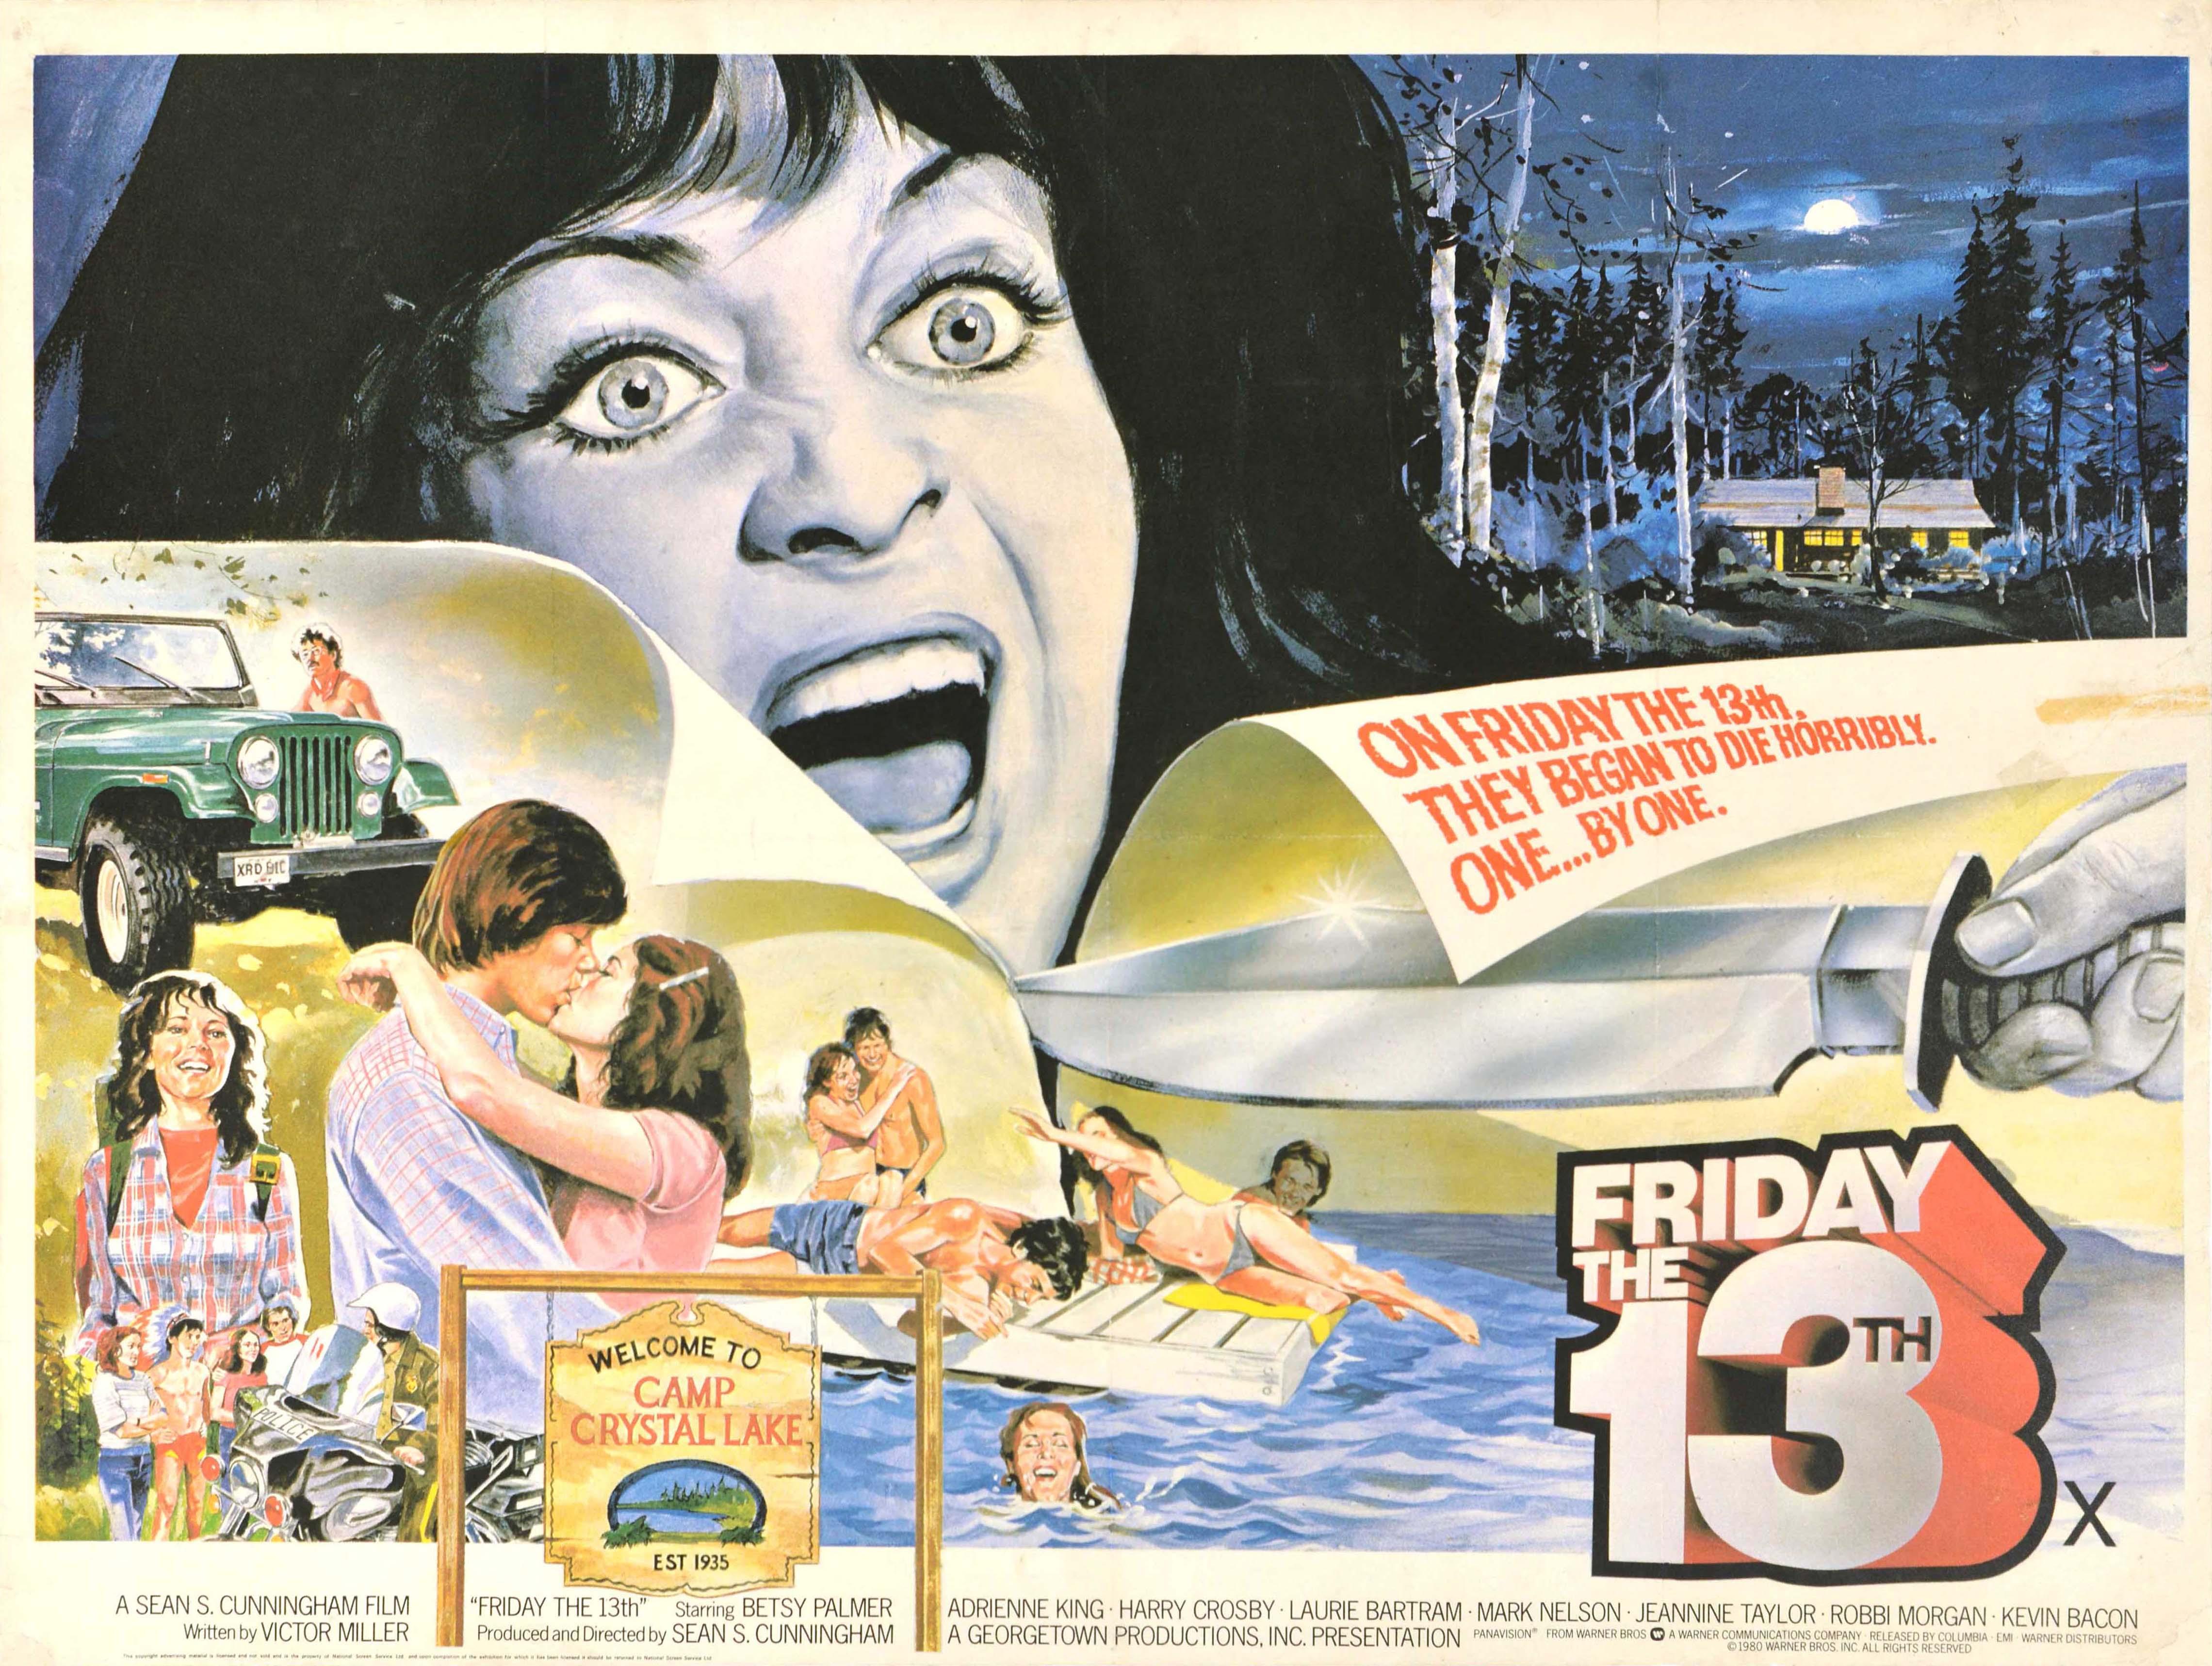 Unknown Print - Original Vintage Film Poster Friday The 13th X Rated Horror Movie Art (UK Quad)